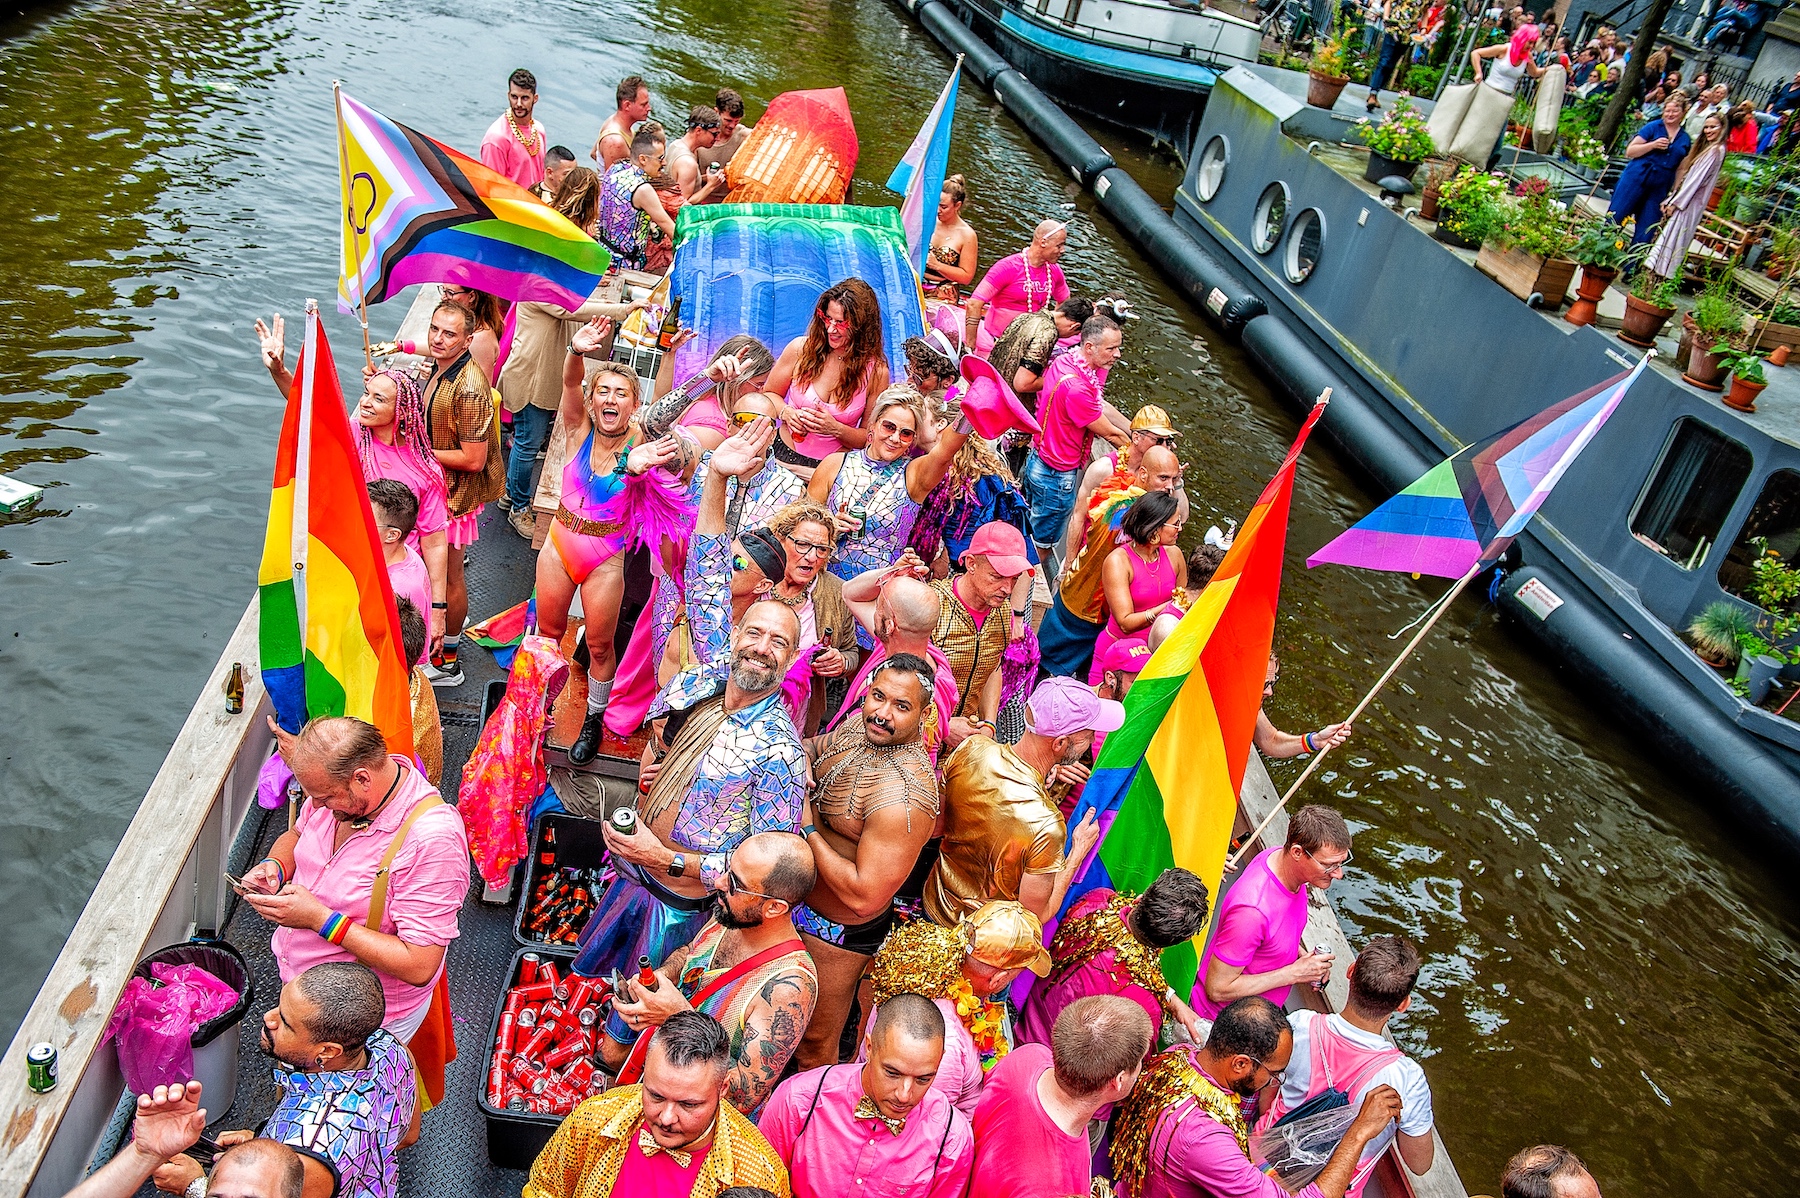 People participate in the canal pride parade in Amsterdam.